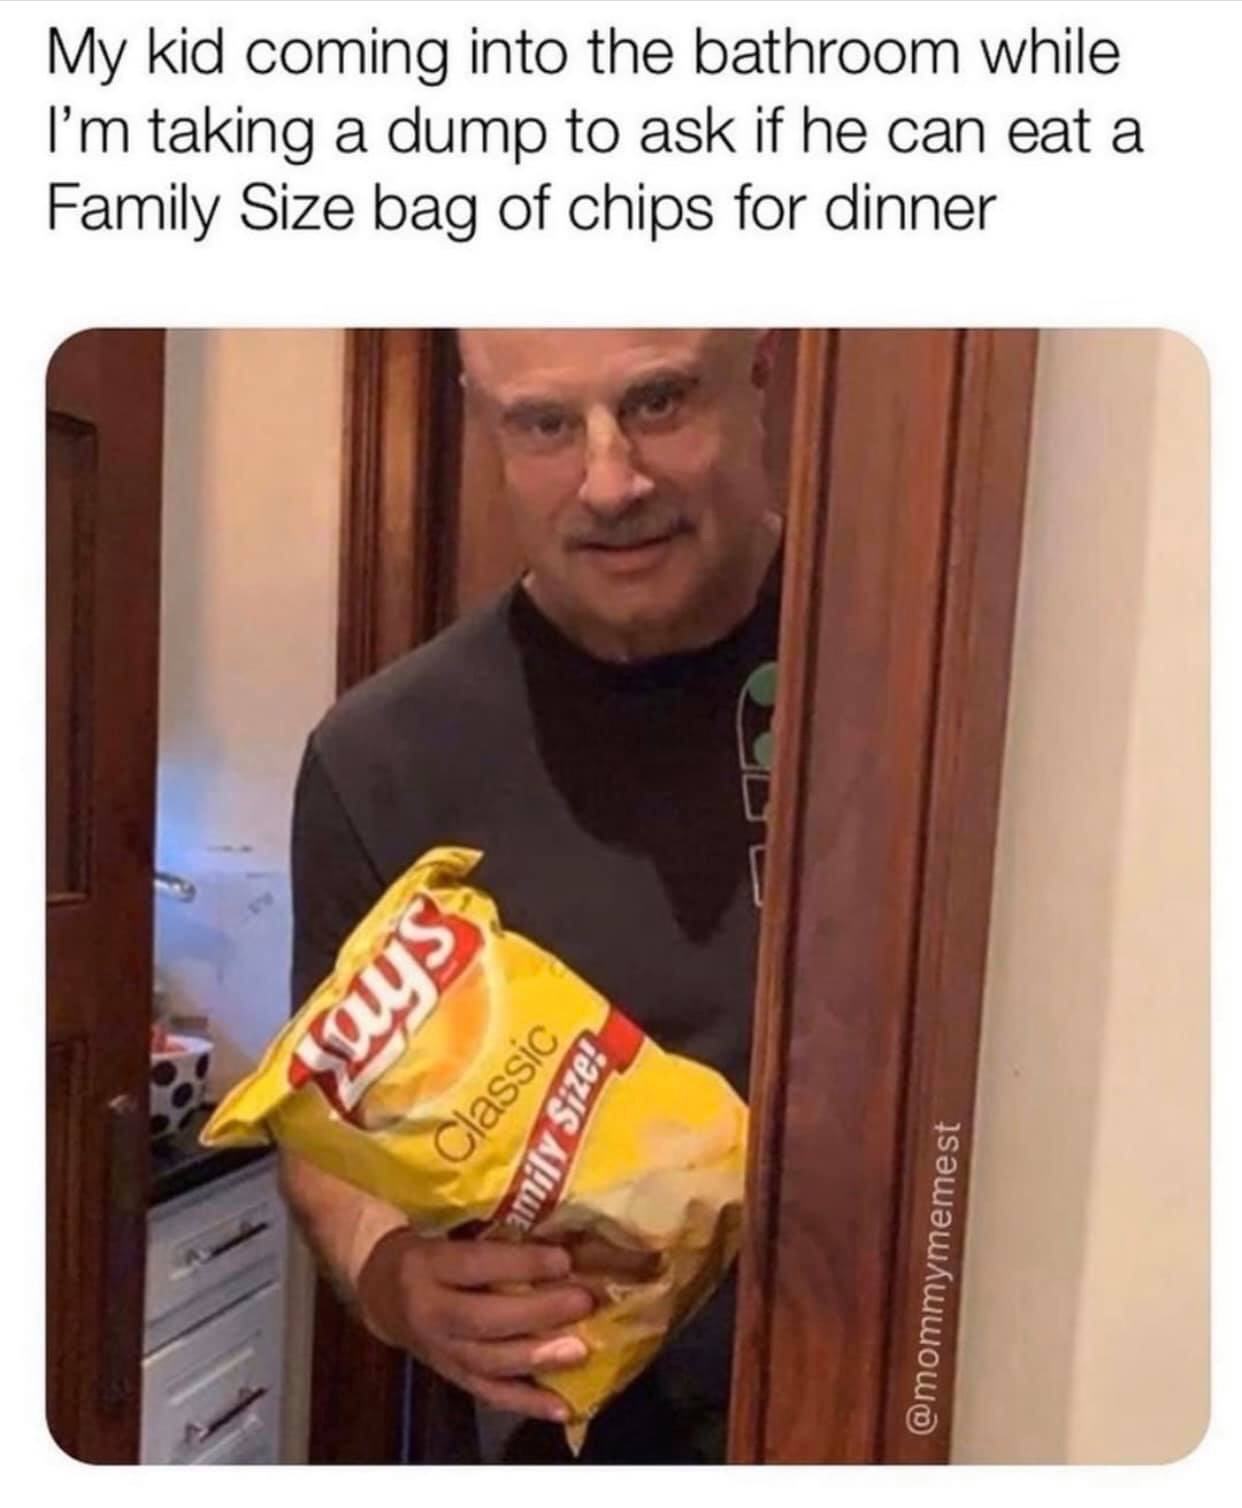 dr phil comes in your room - My kid coming into the bathroom while I'm taking a dump to ask if he can eat a Family Size bag of chips for dinner smas Classic amily Size!